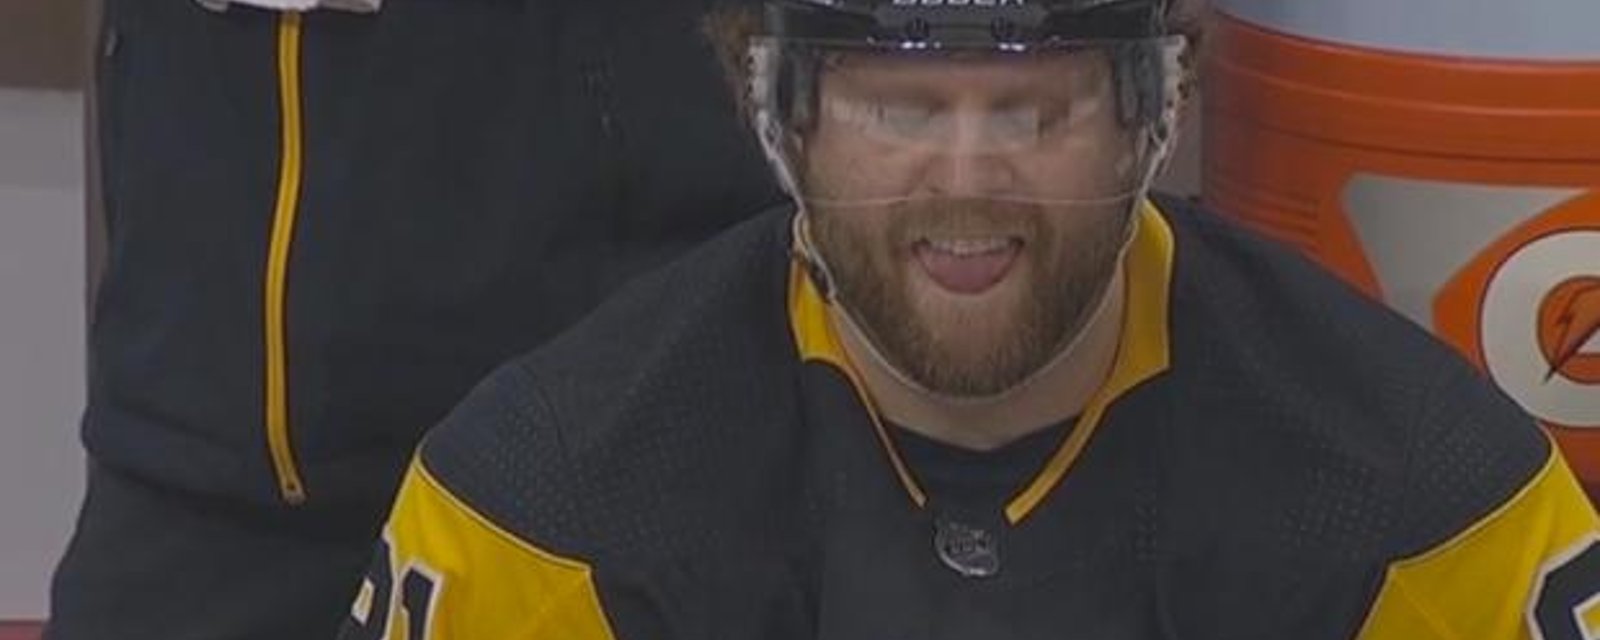 The Legend of Kessel grows with hilarious anecdote from former teammates! 